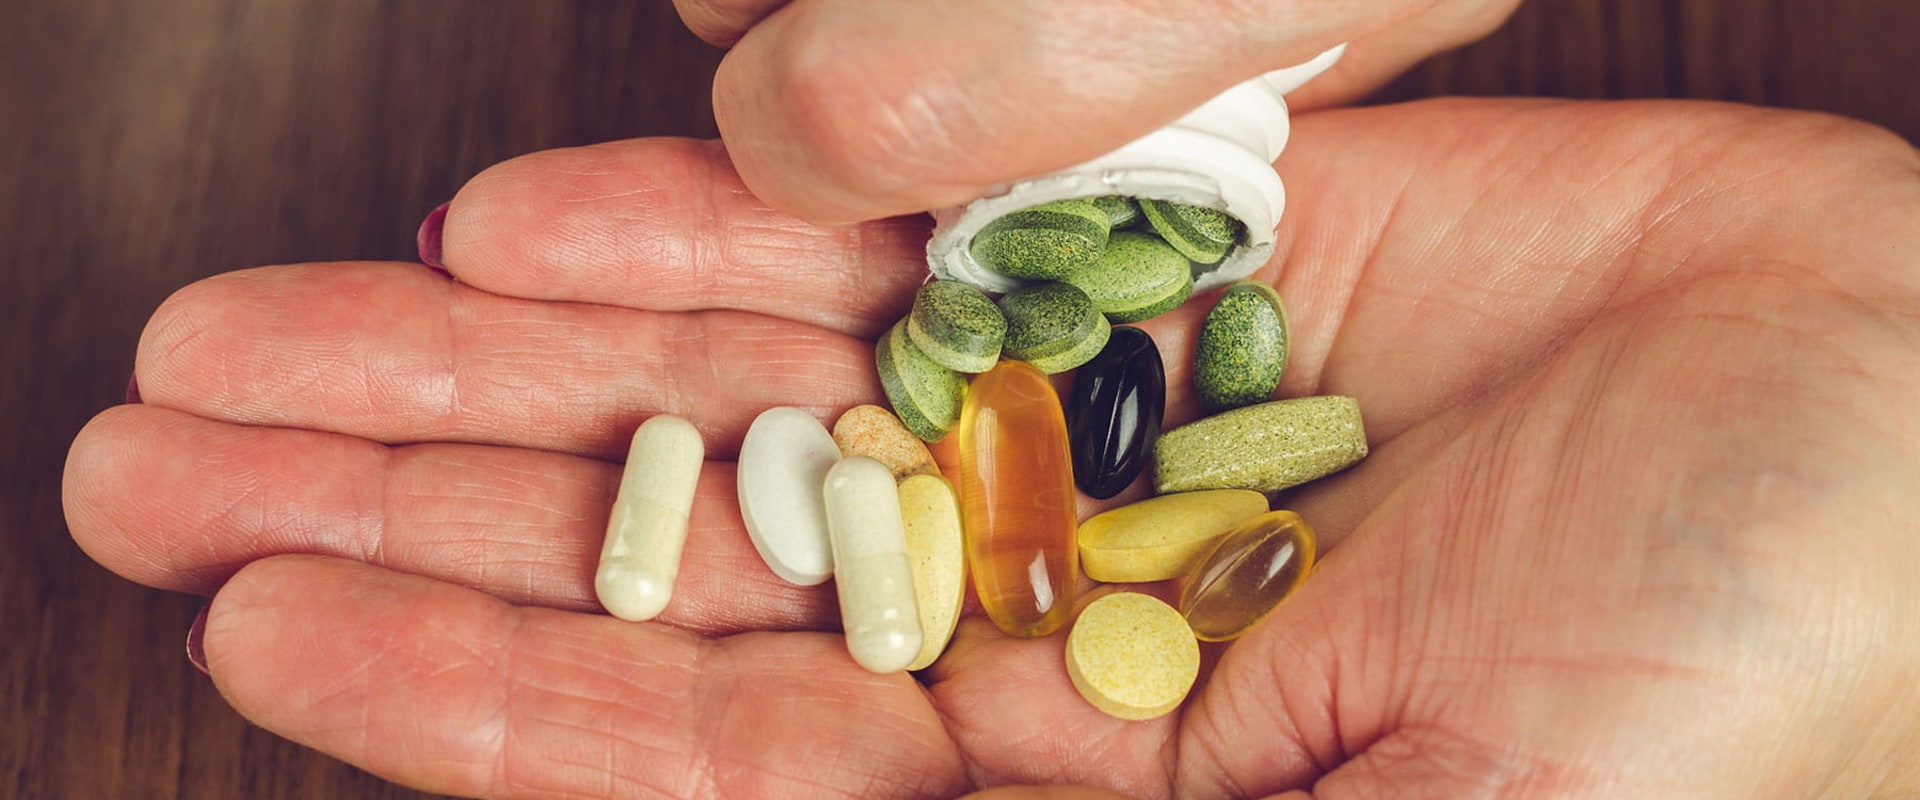 How do you know if you're taking too much vitamins?